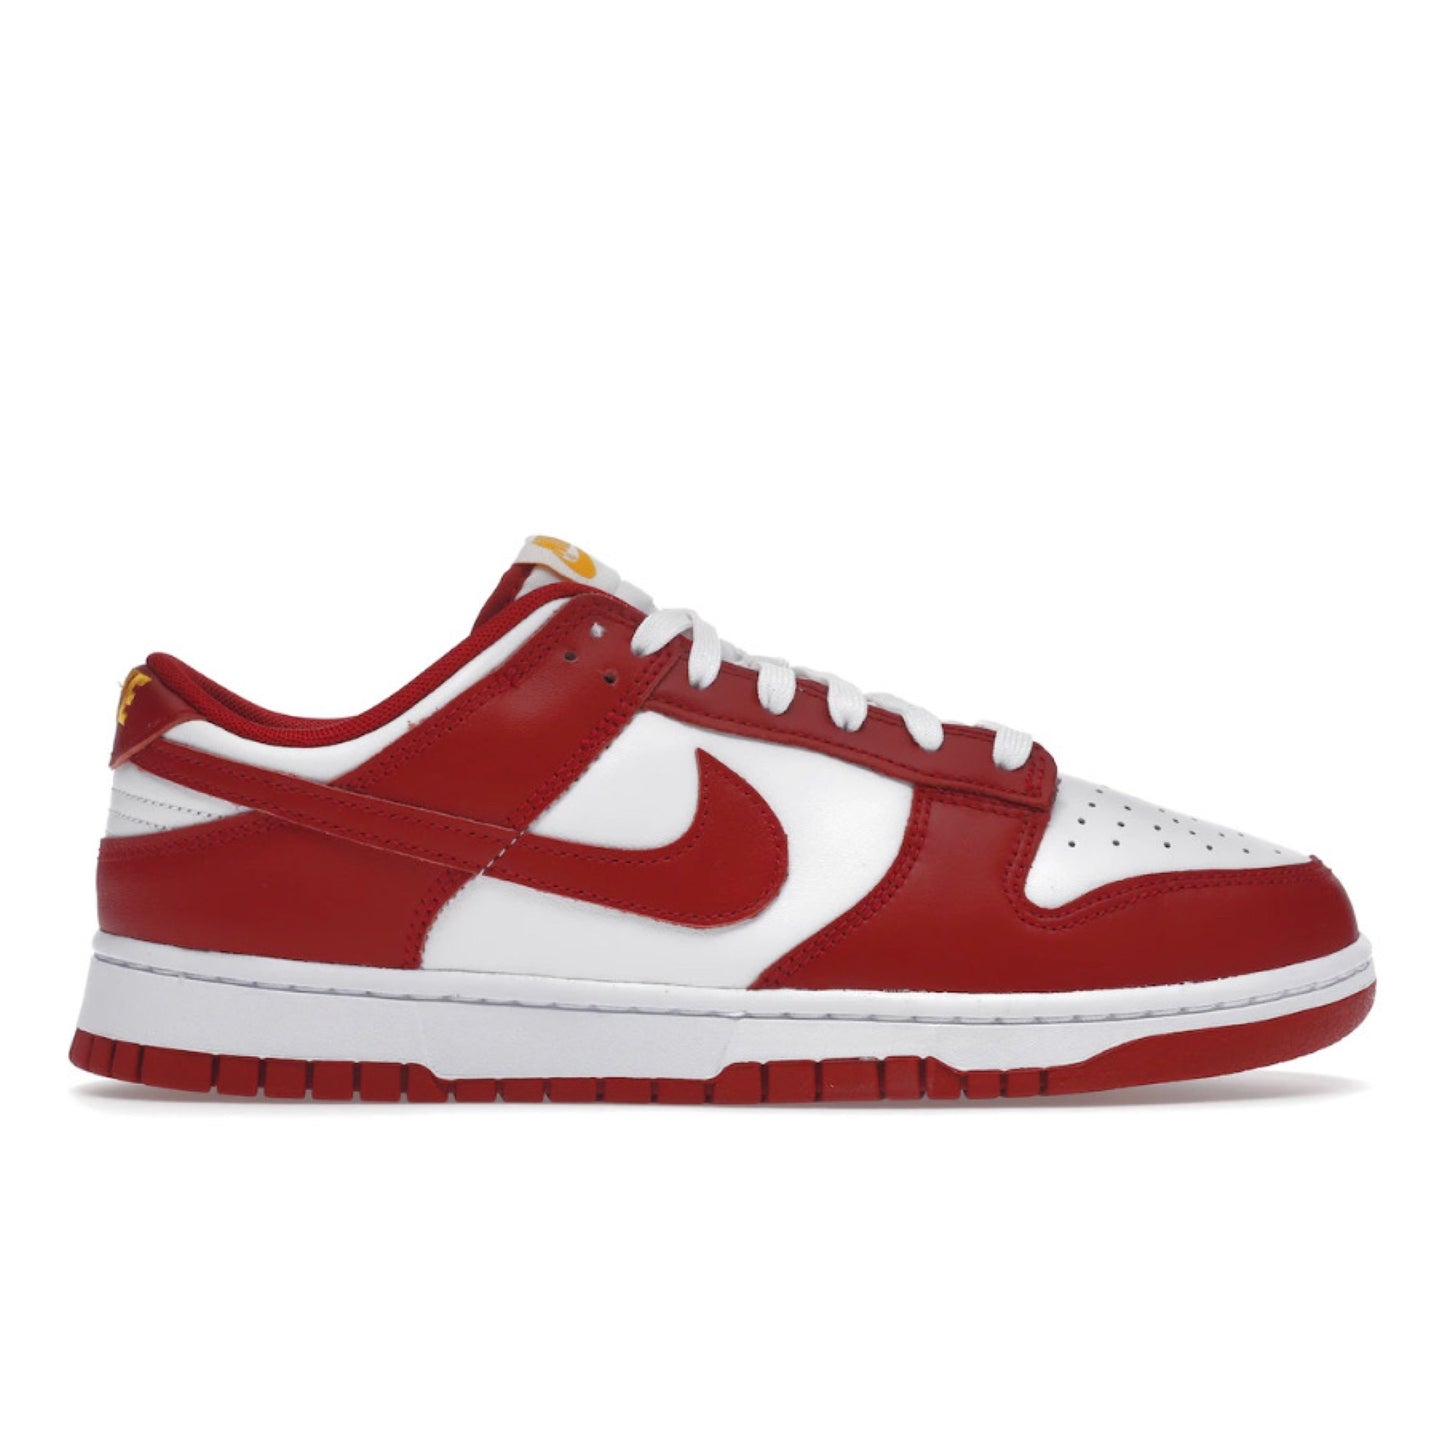 Contrast Clothing Worthing Nike Dunk Low SC Sneakers